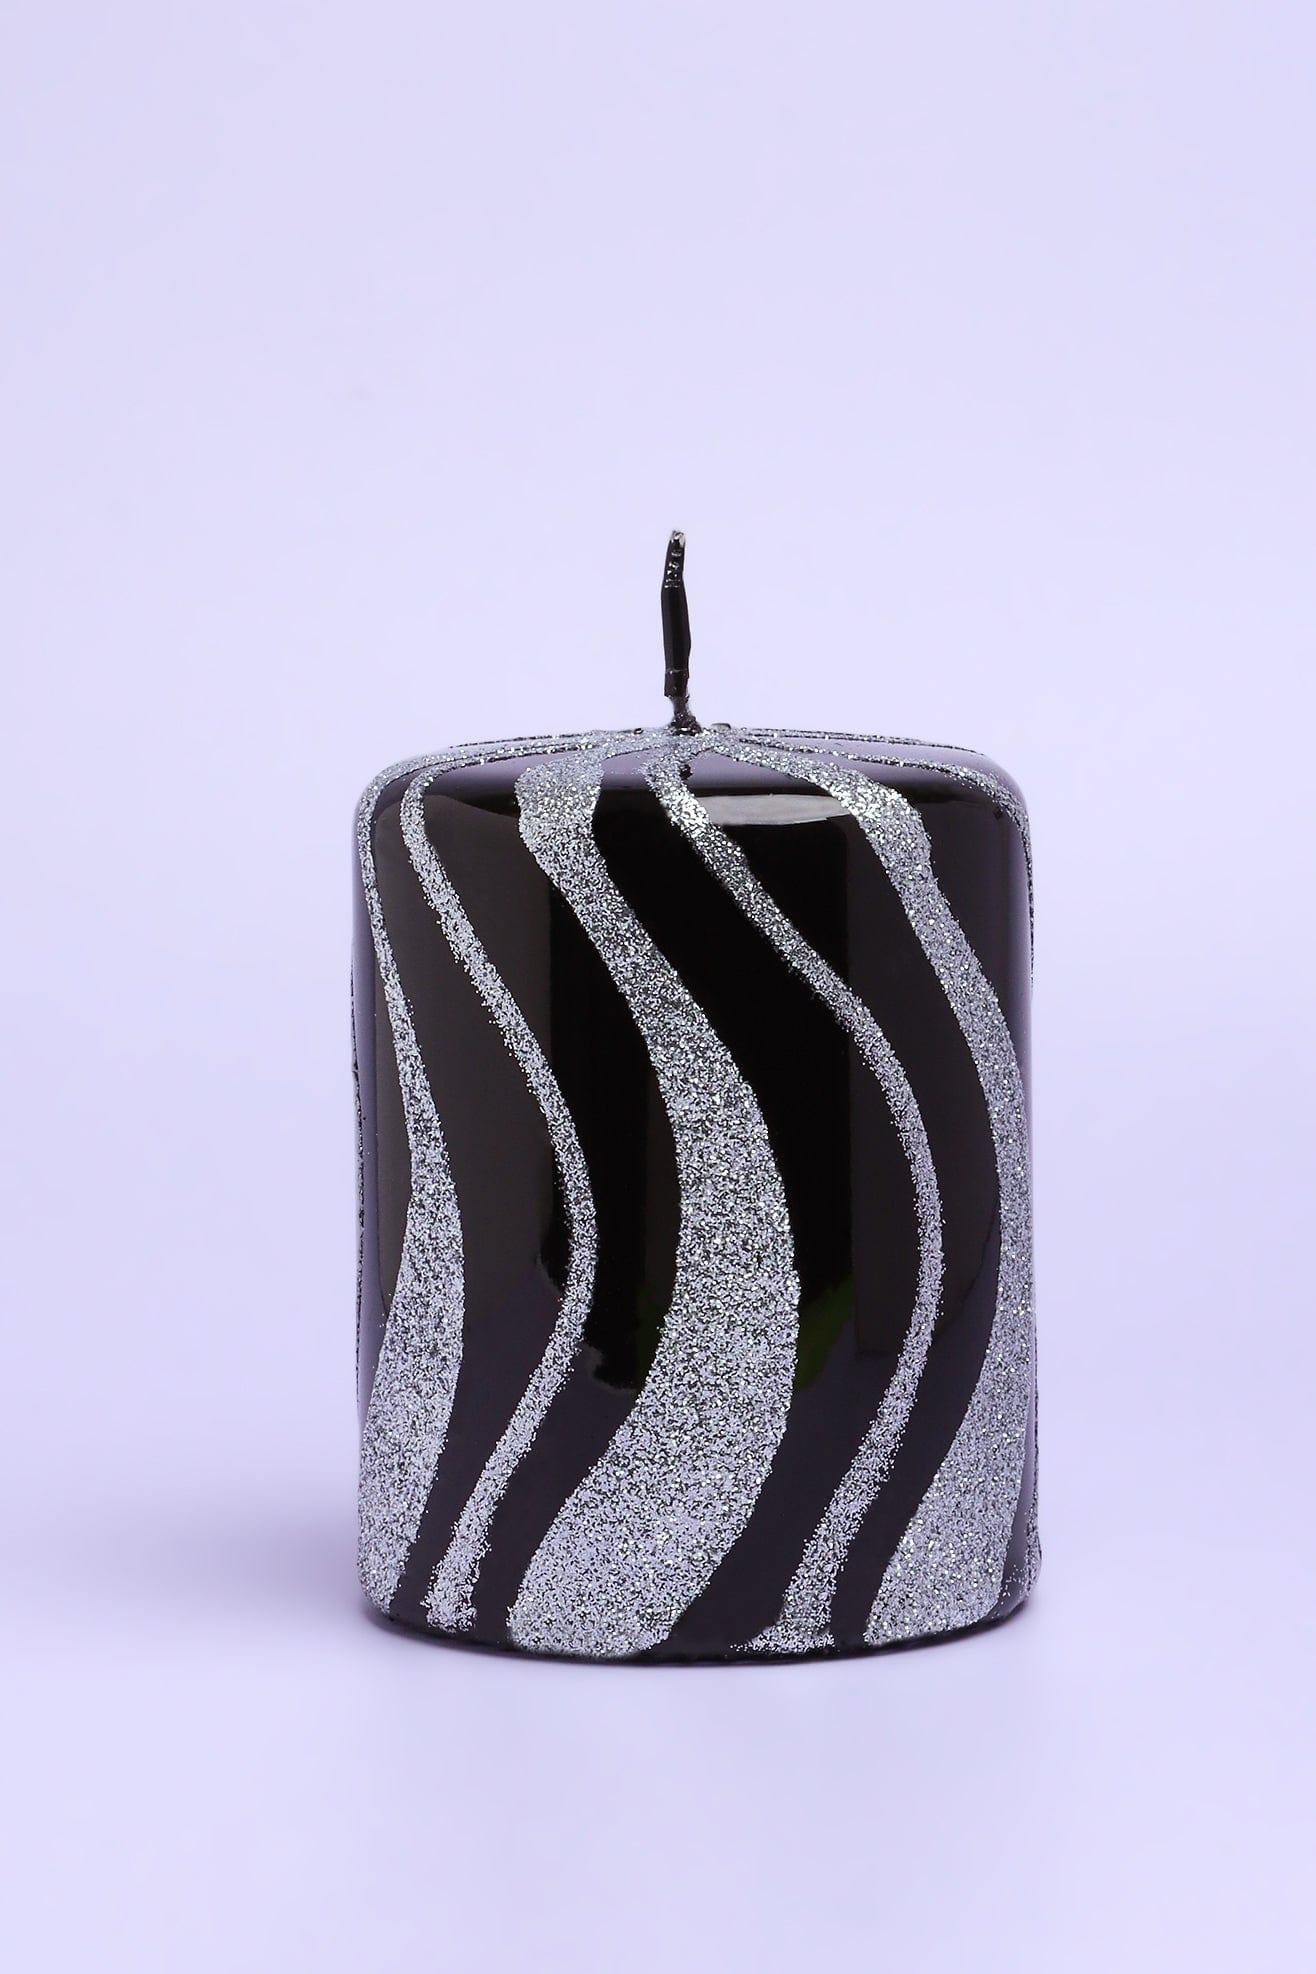 G Decor Candles & Candle Holders Black / Small Pillar Black and Silver Spiral Glitter Glass Effect Reflecting Gloss Pillar Candles